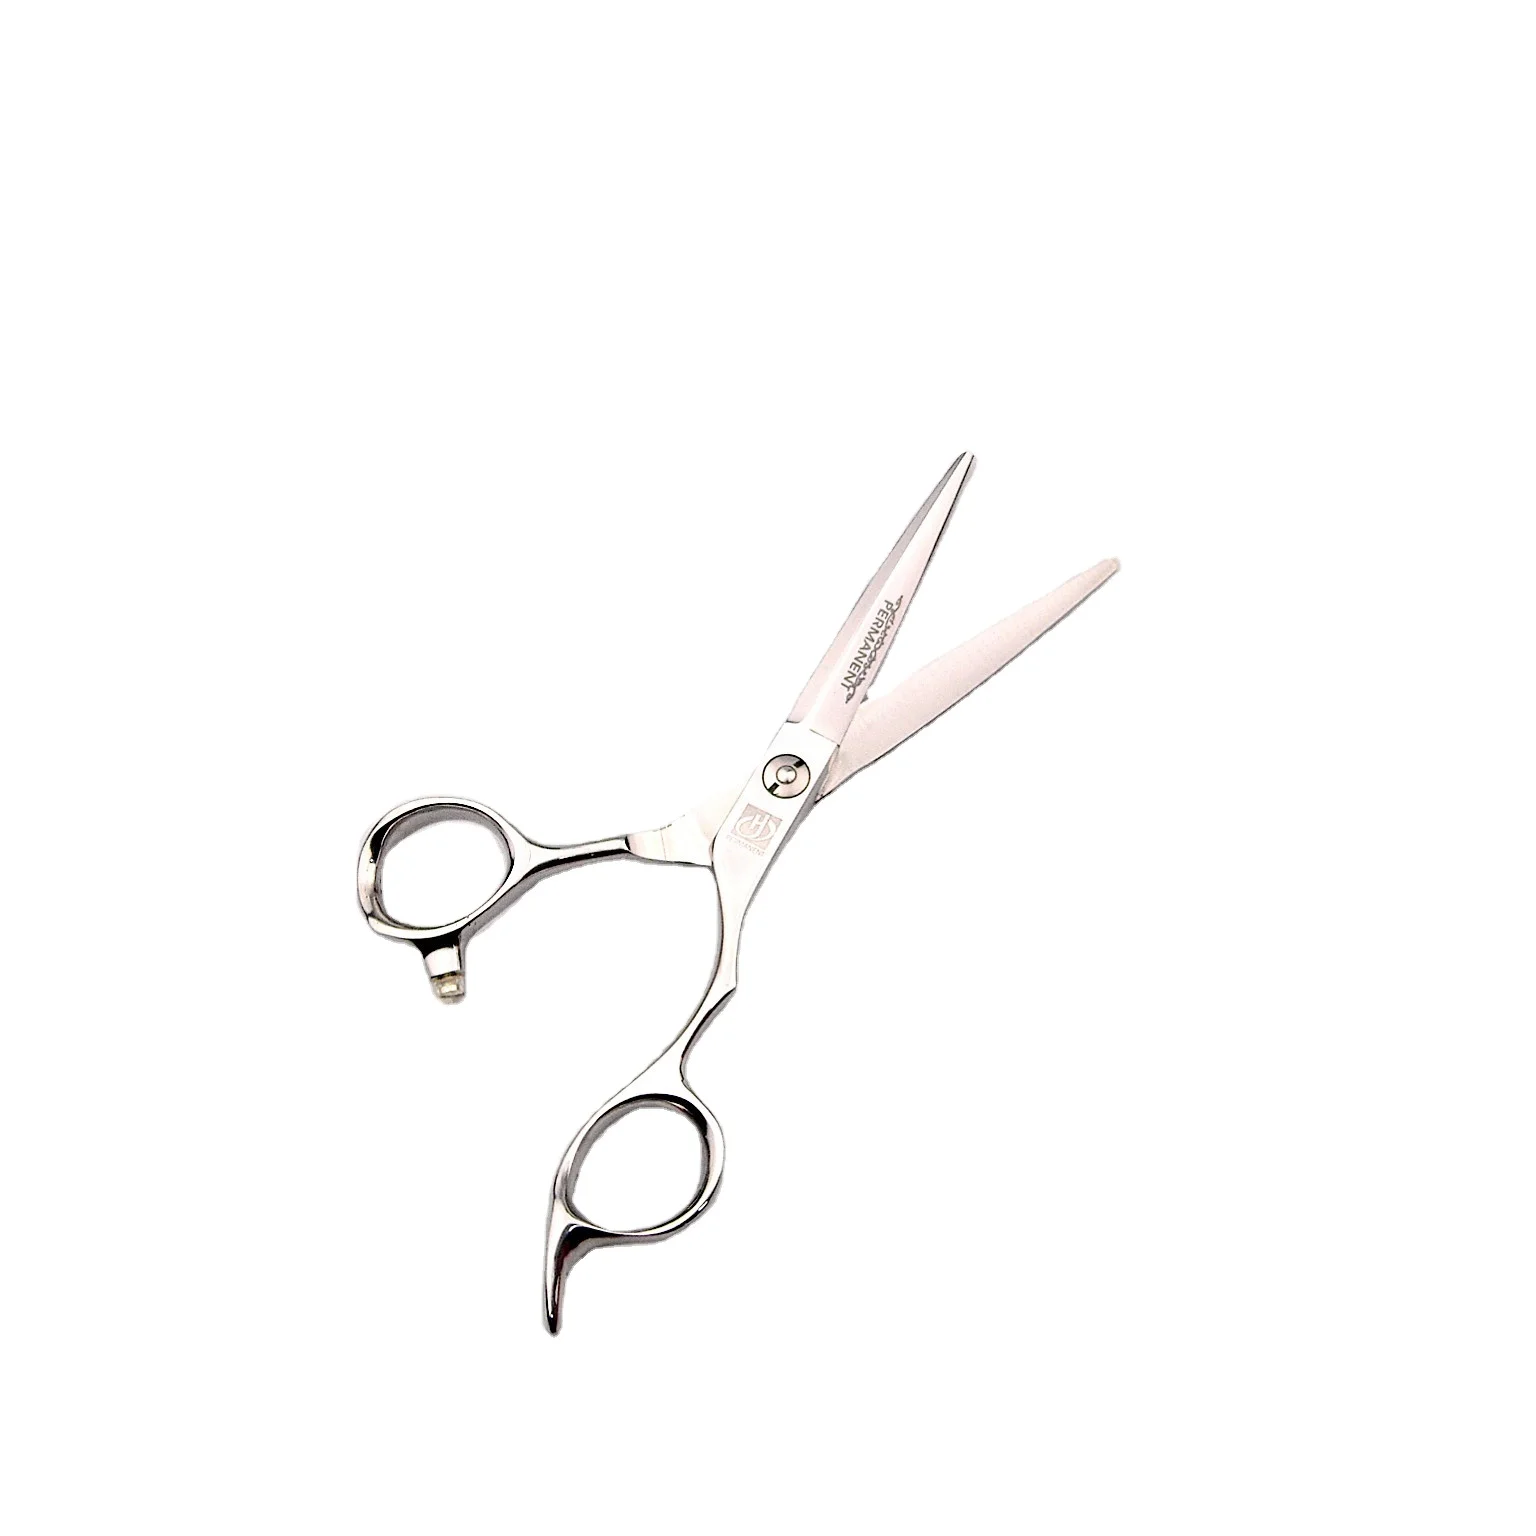 

Low cost direct sales fine polishing sharp high quality professional 440c steel barber custom scissors, Silver or other color you wanted